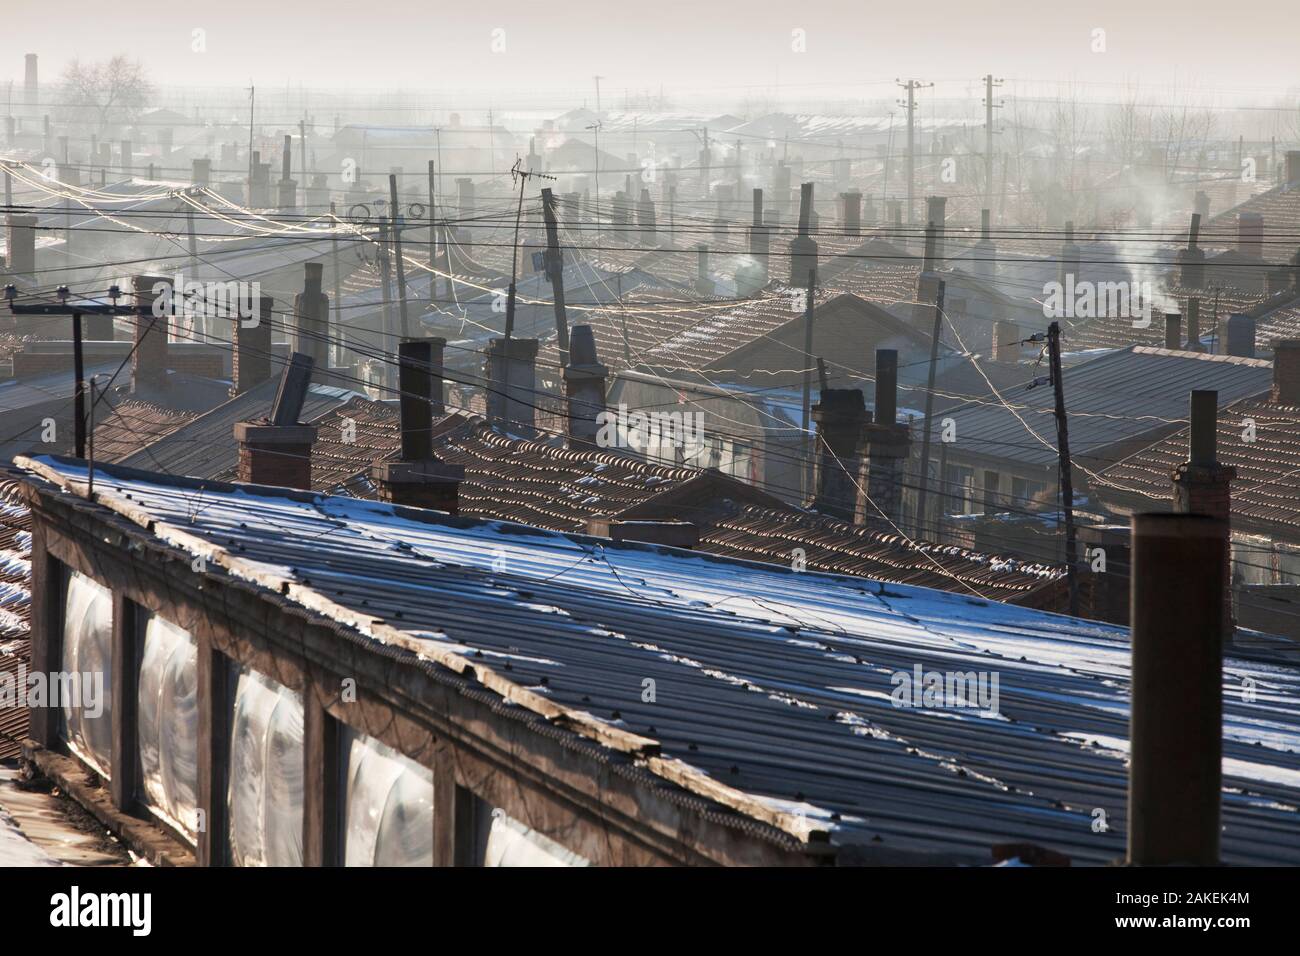 Dwellings in Suihua with smoke coming out from the chimneys, Heilongjiang Province, China. Stock Photo